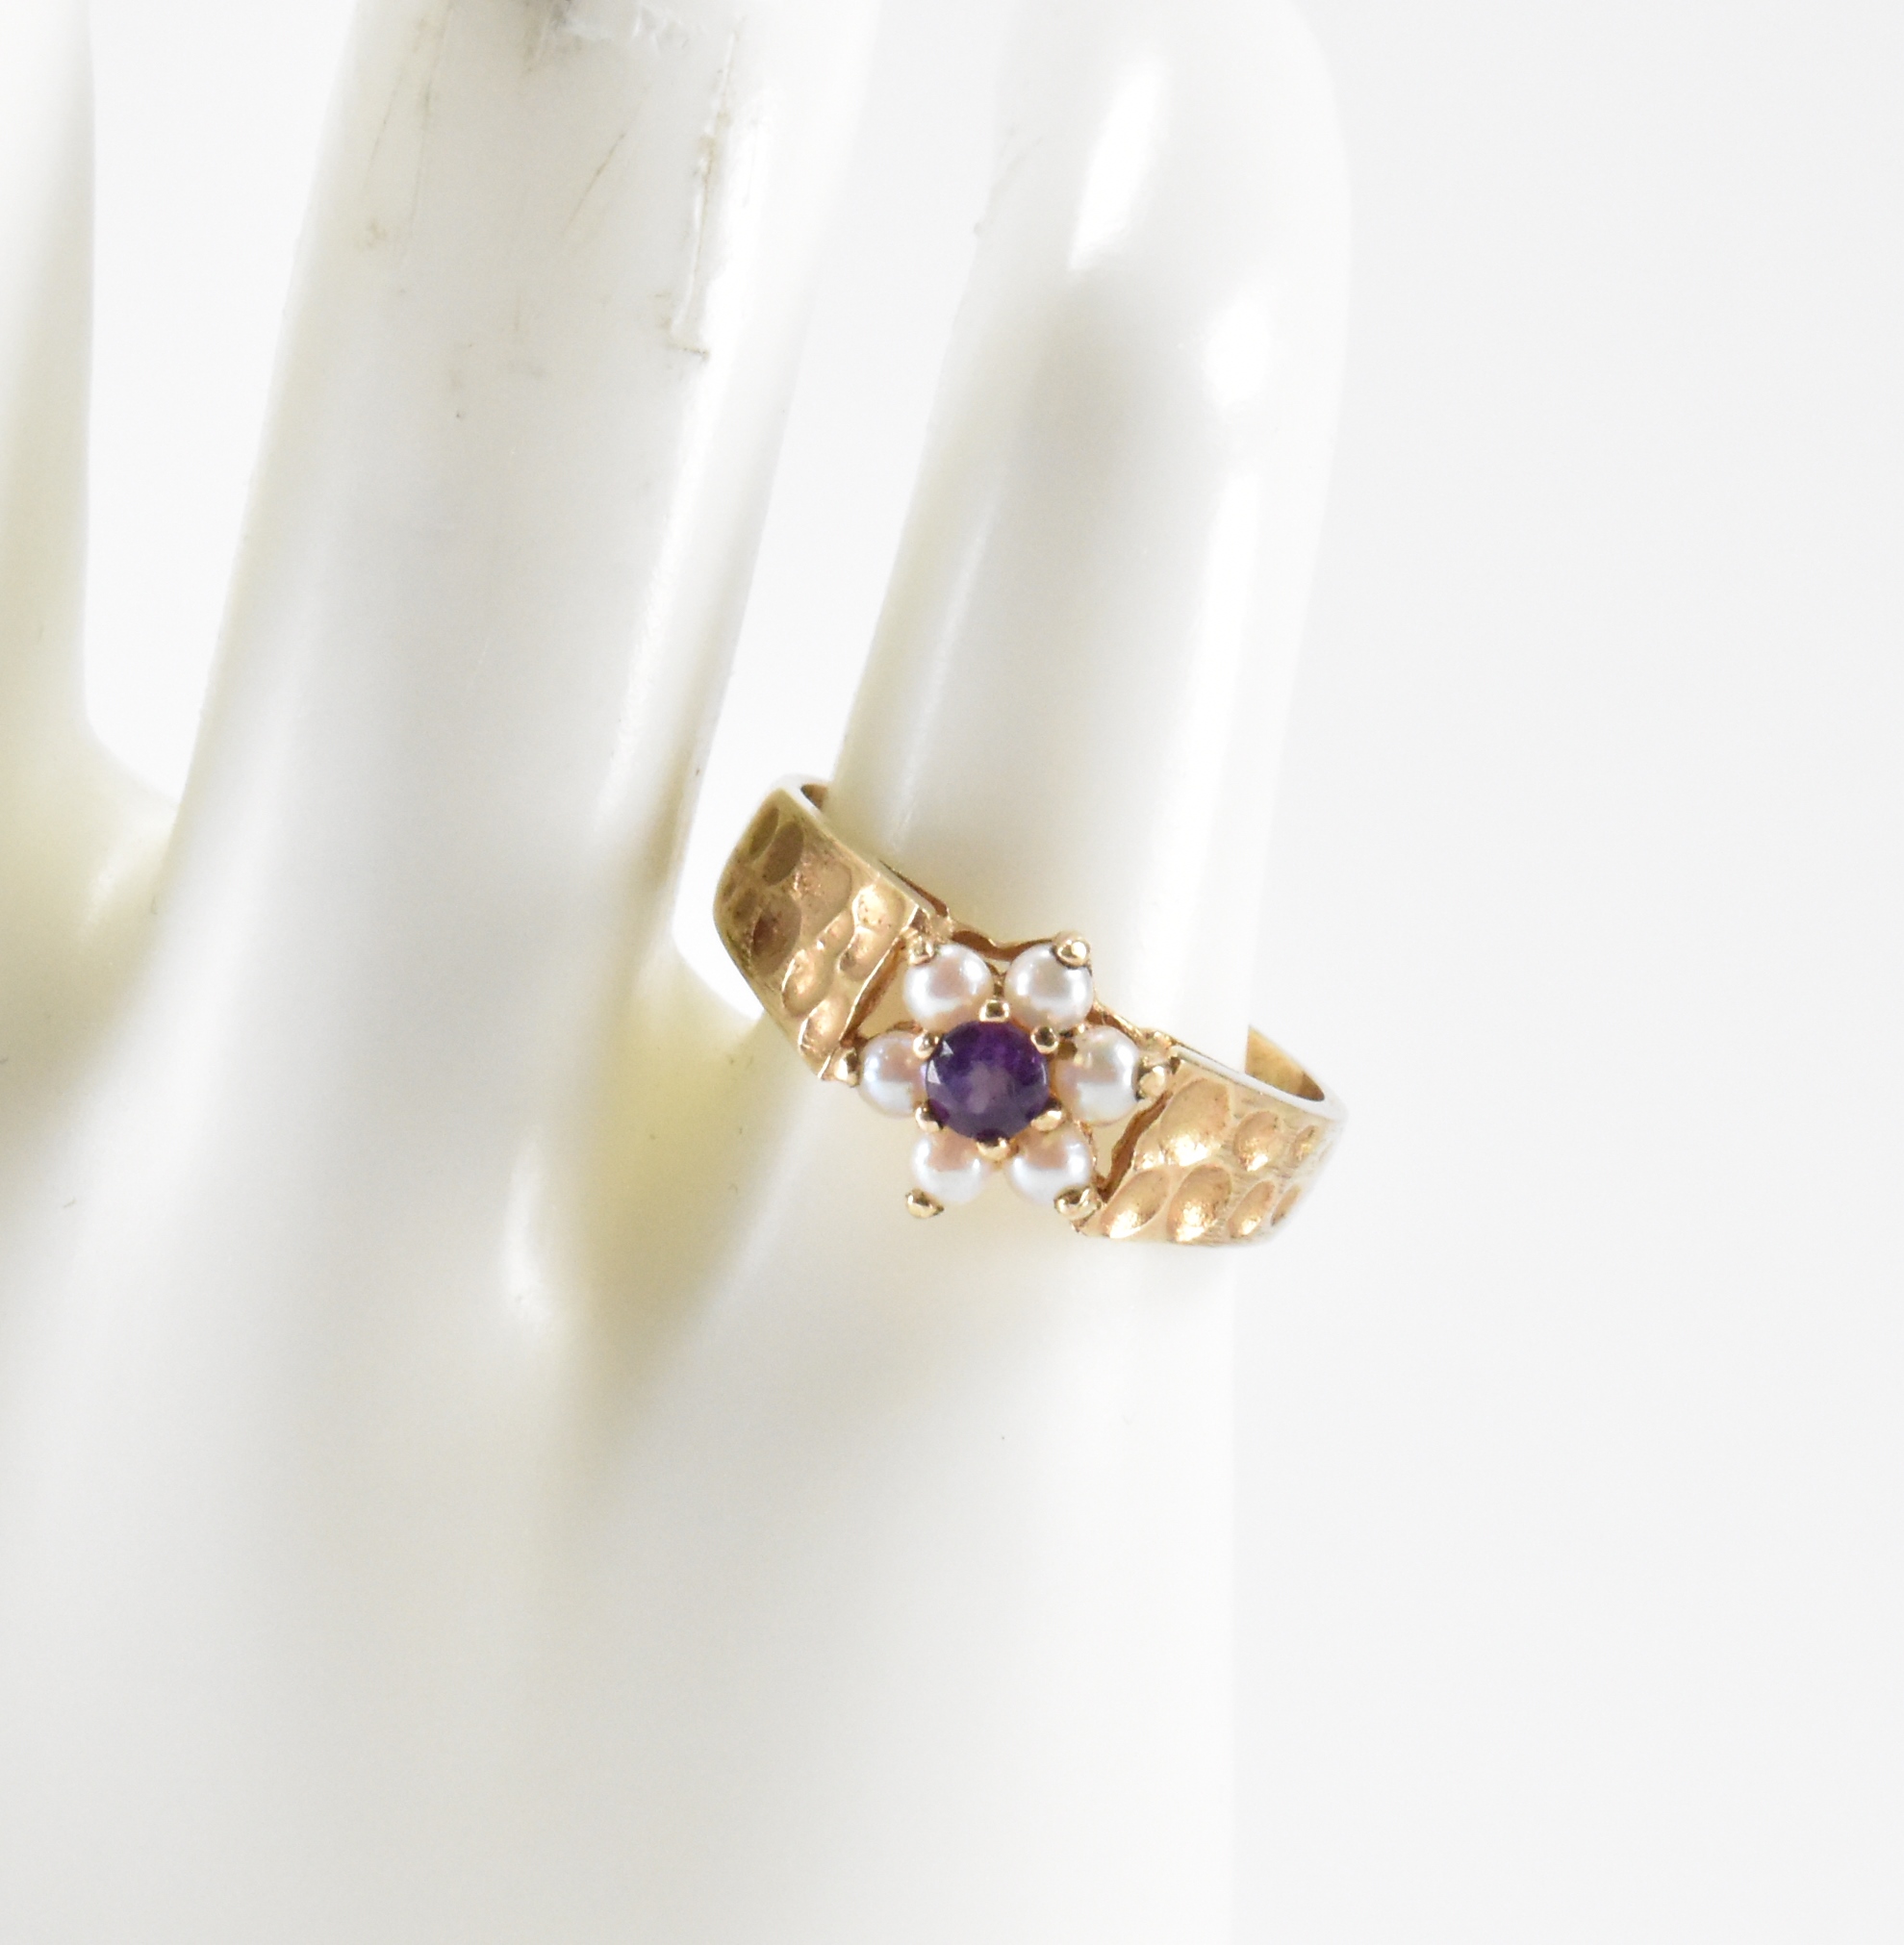 HALLMARKED 9CT GOLD AMETHYST & PEARL RING - Image 5 of 5